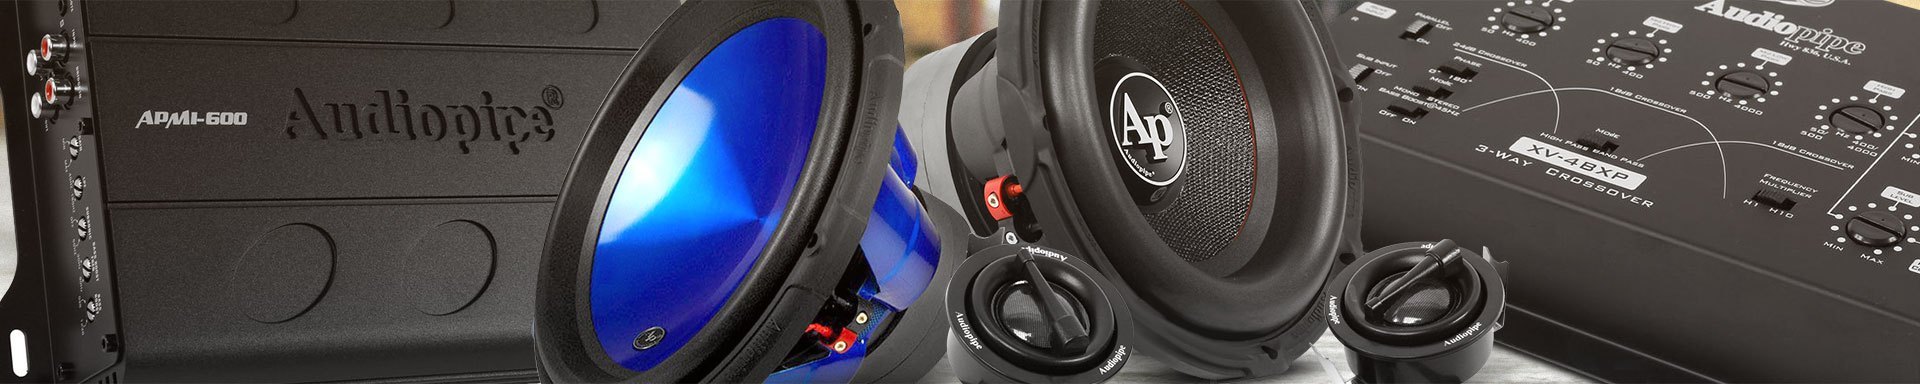 Audiopipe Equalizers & Processors